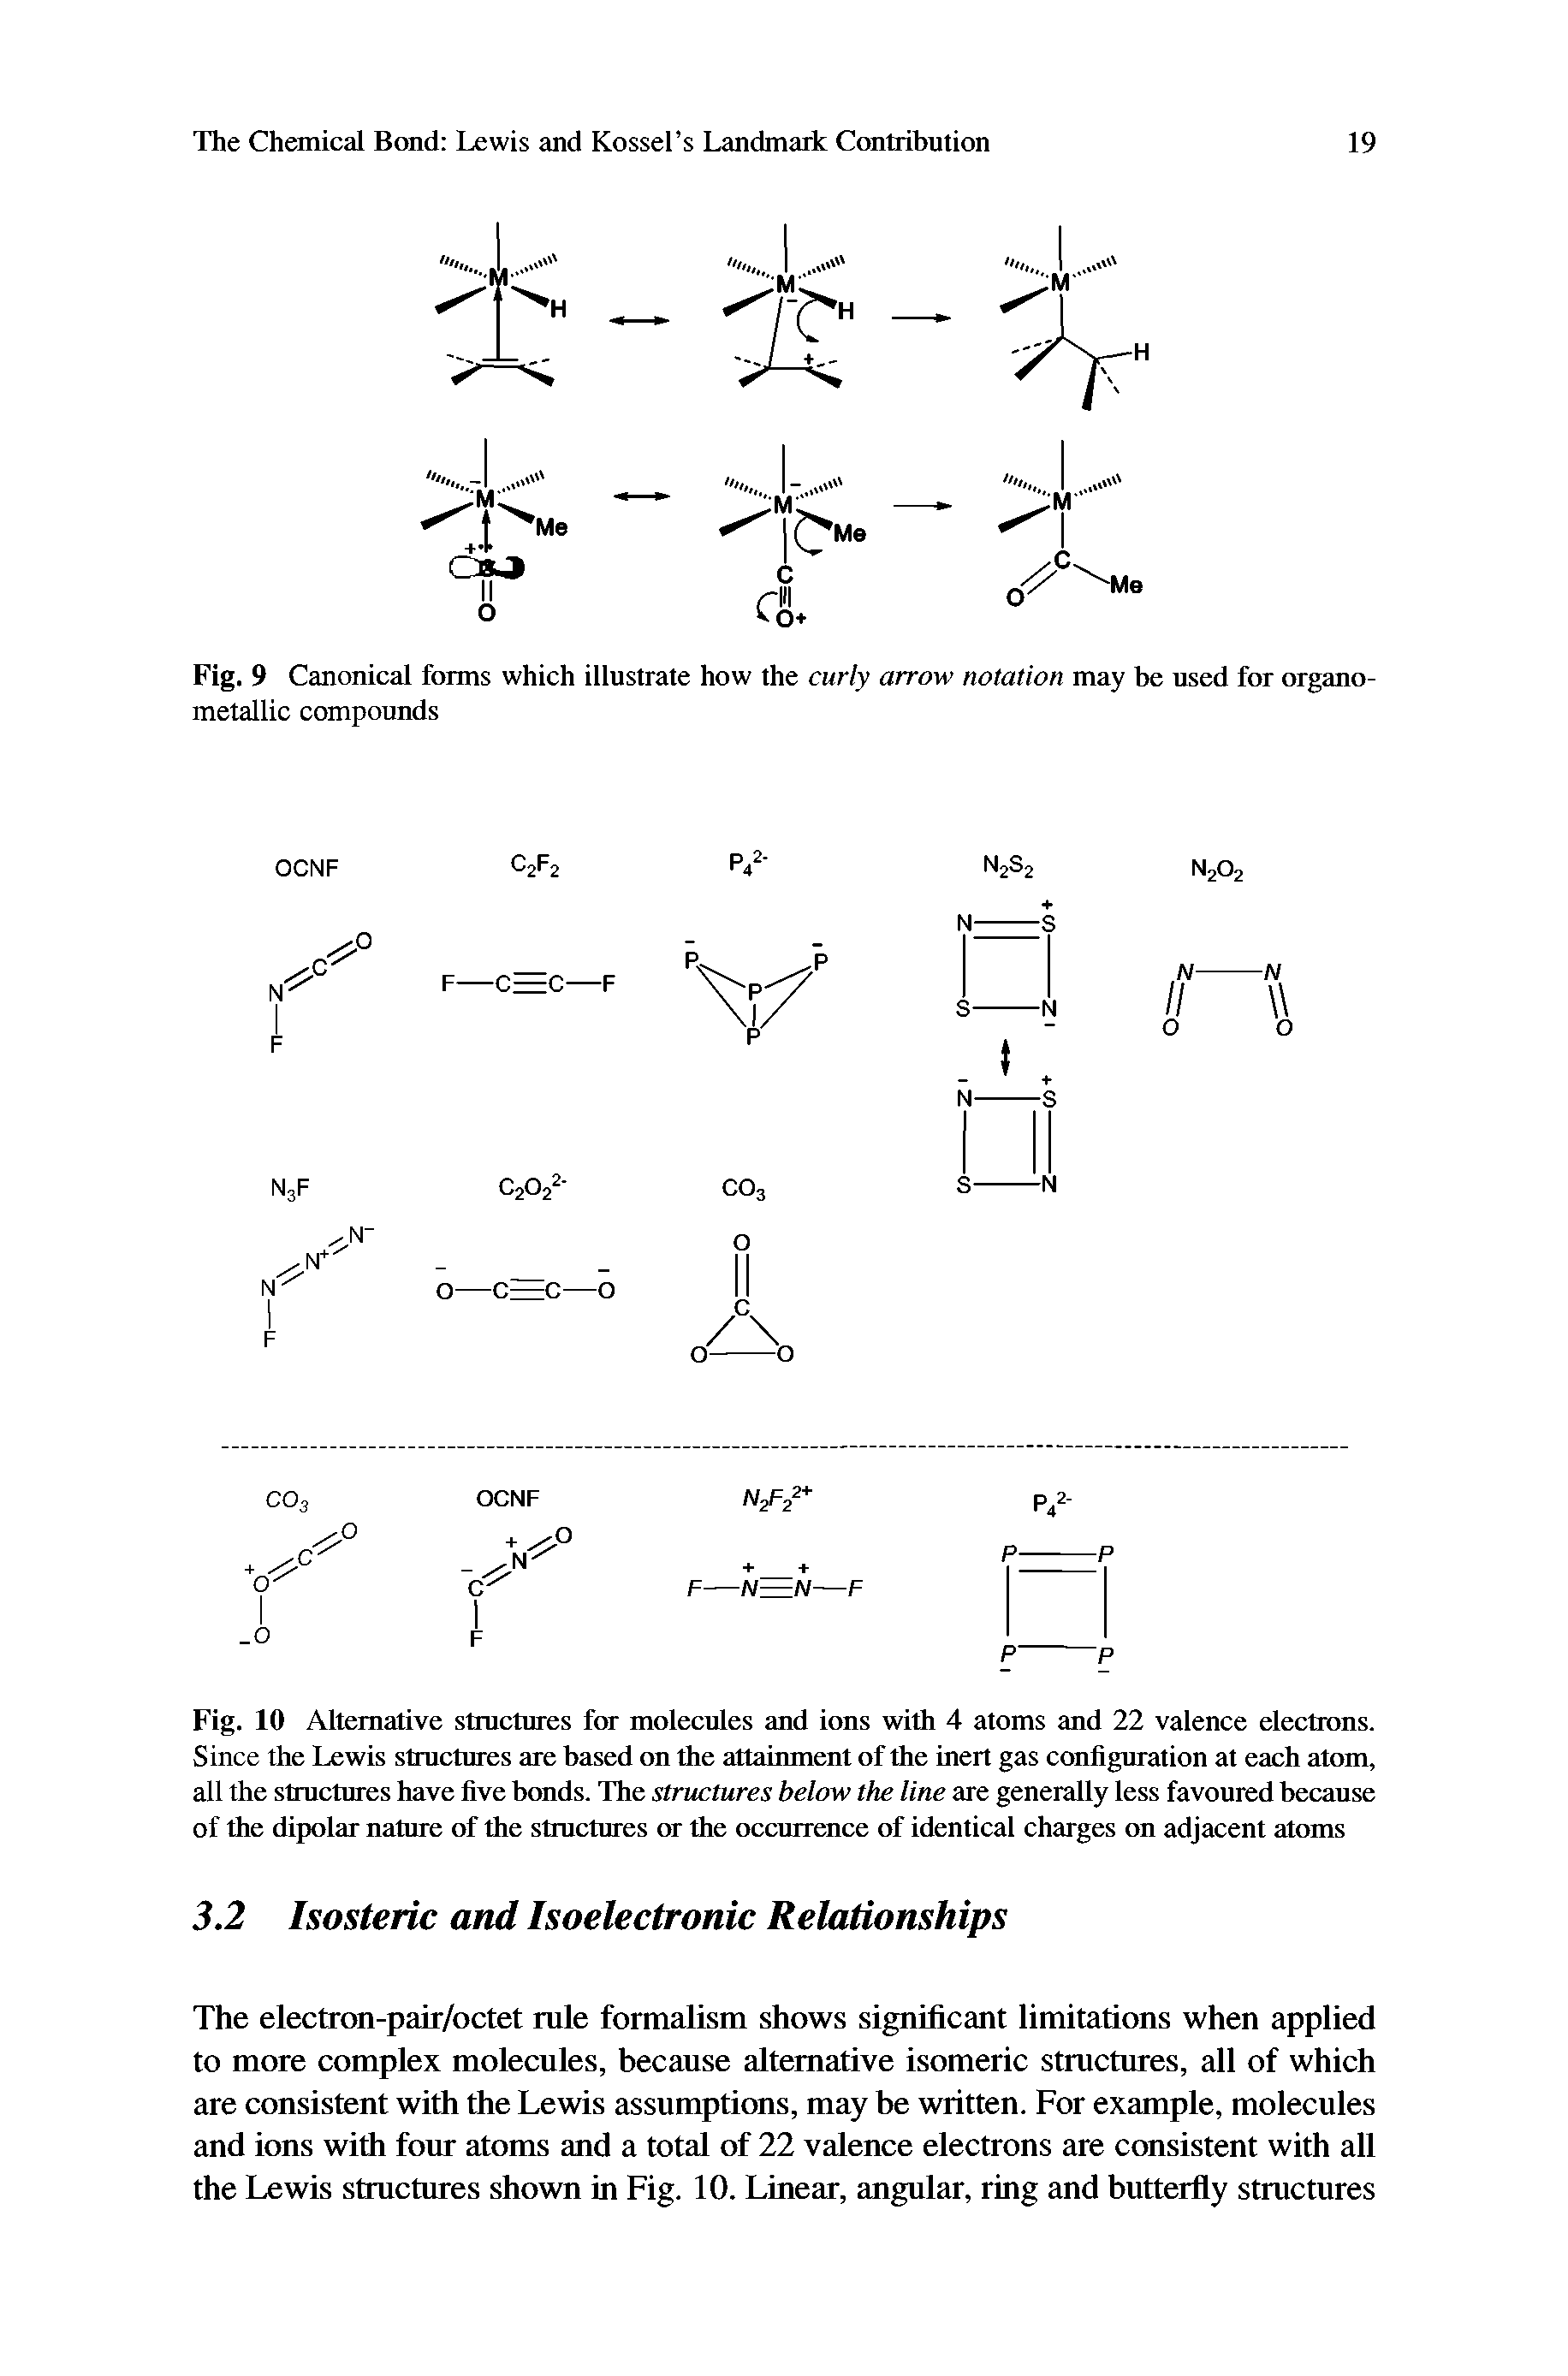 Fig. 9 Canonical forms which illustrate how the curly arrow notation may be used for organo-metallic compounds...